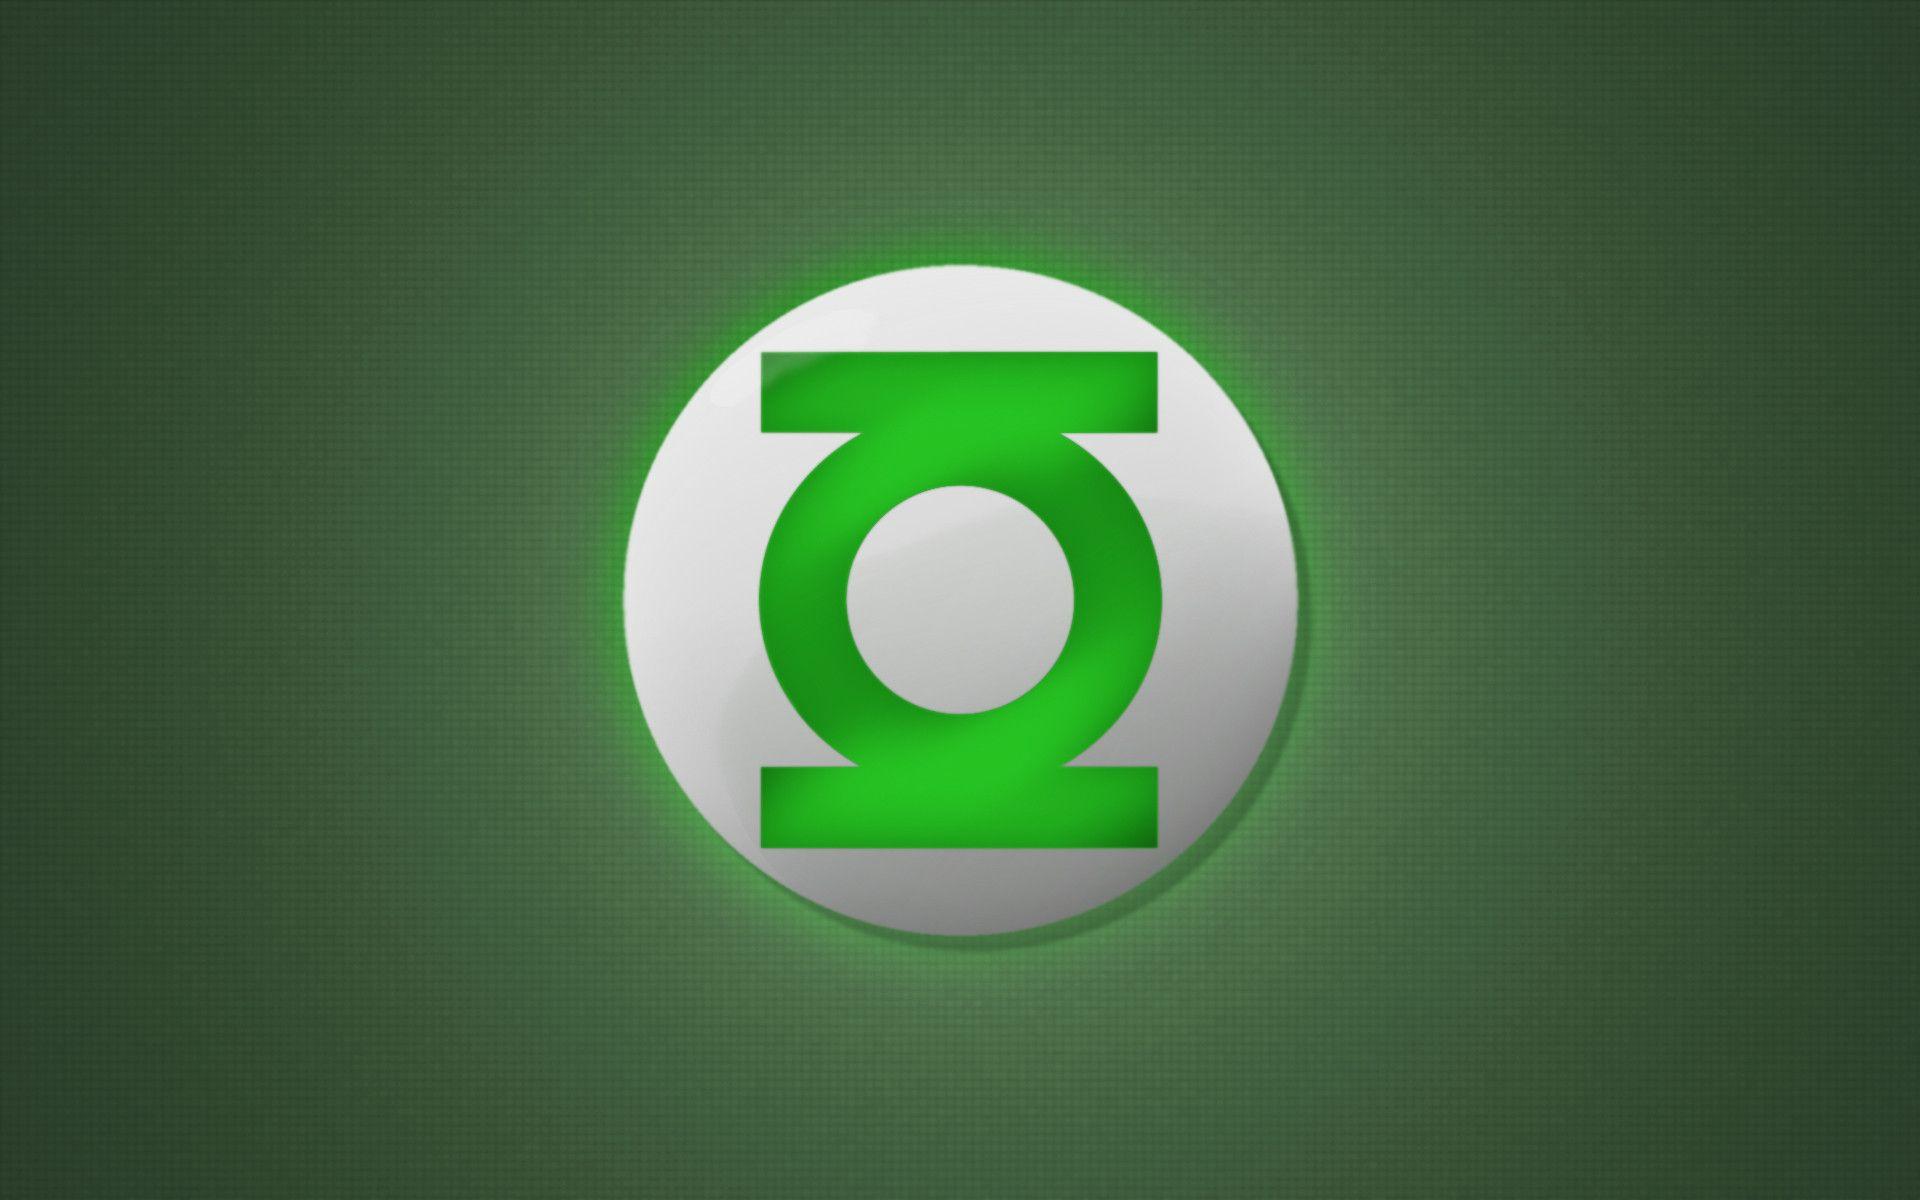 Wallpapers For > Green Lantern Logo Wallpapers